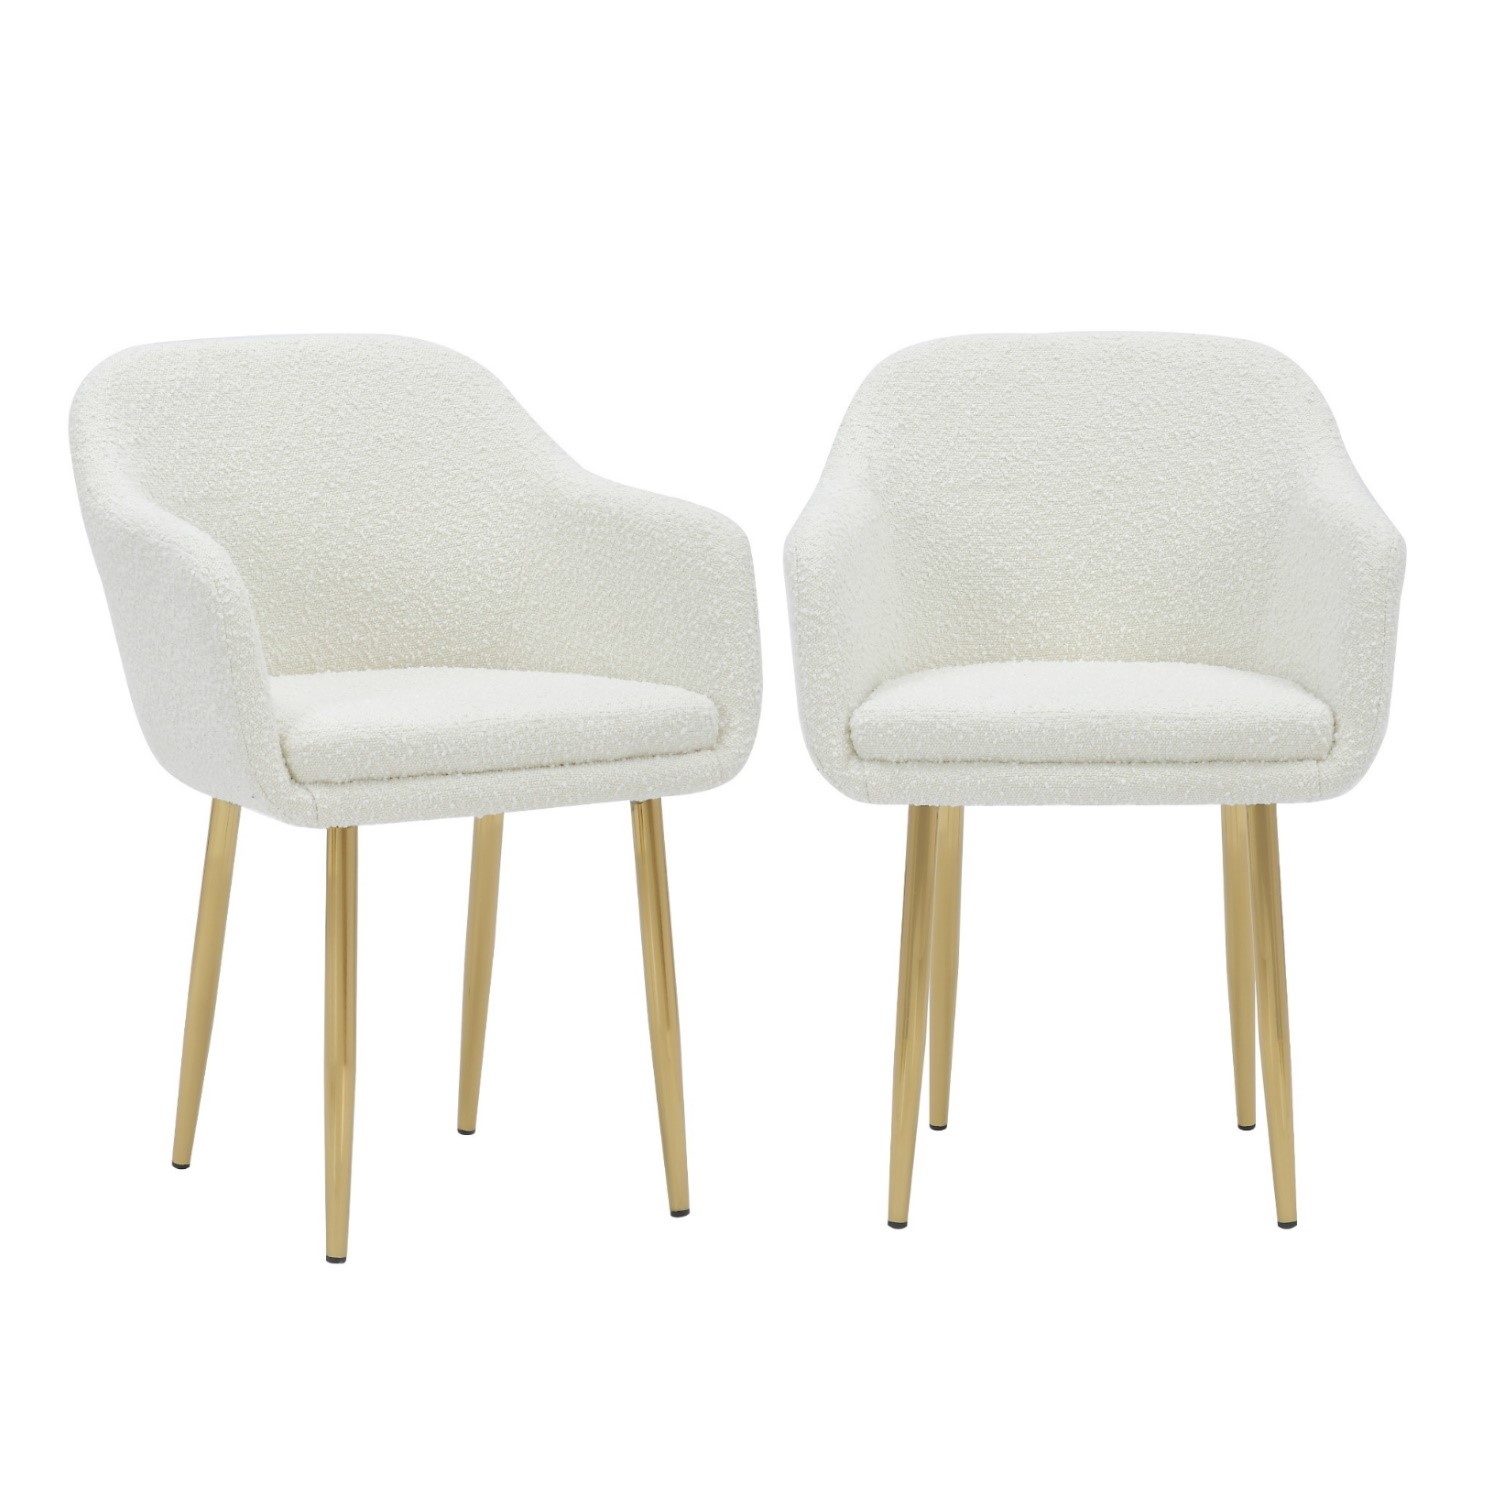 Photo of Set of 2 cream boucle armchair dining chairs with brass legs -ally